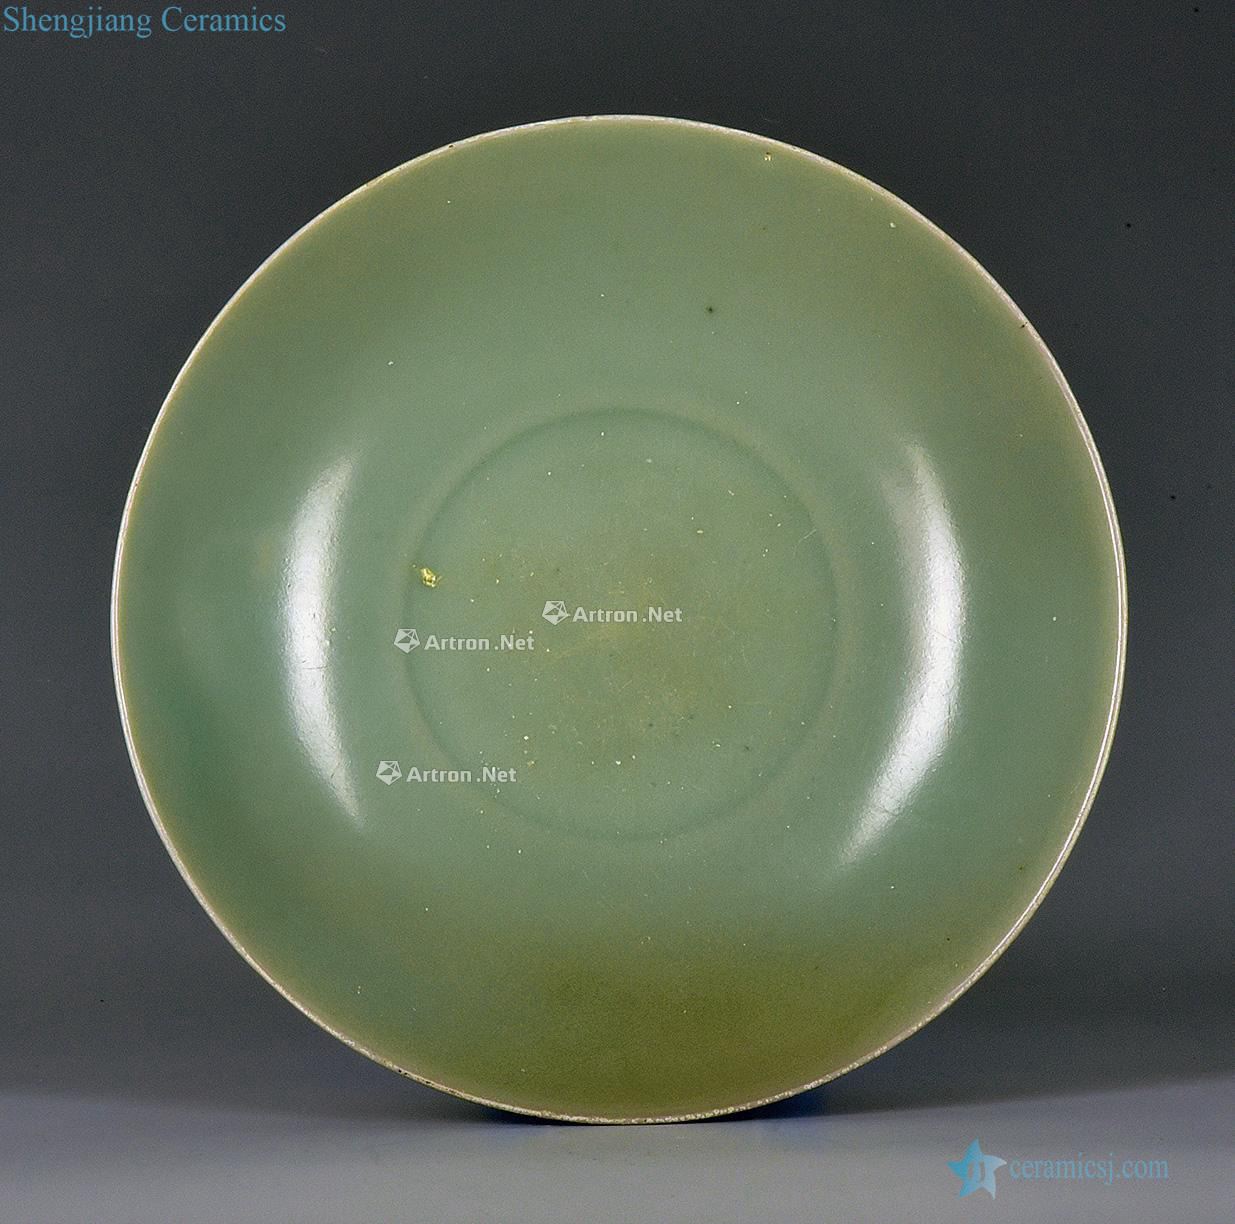 The southern song dynasty Longquan celadon powder blue glaze carved lotus valve tray